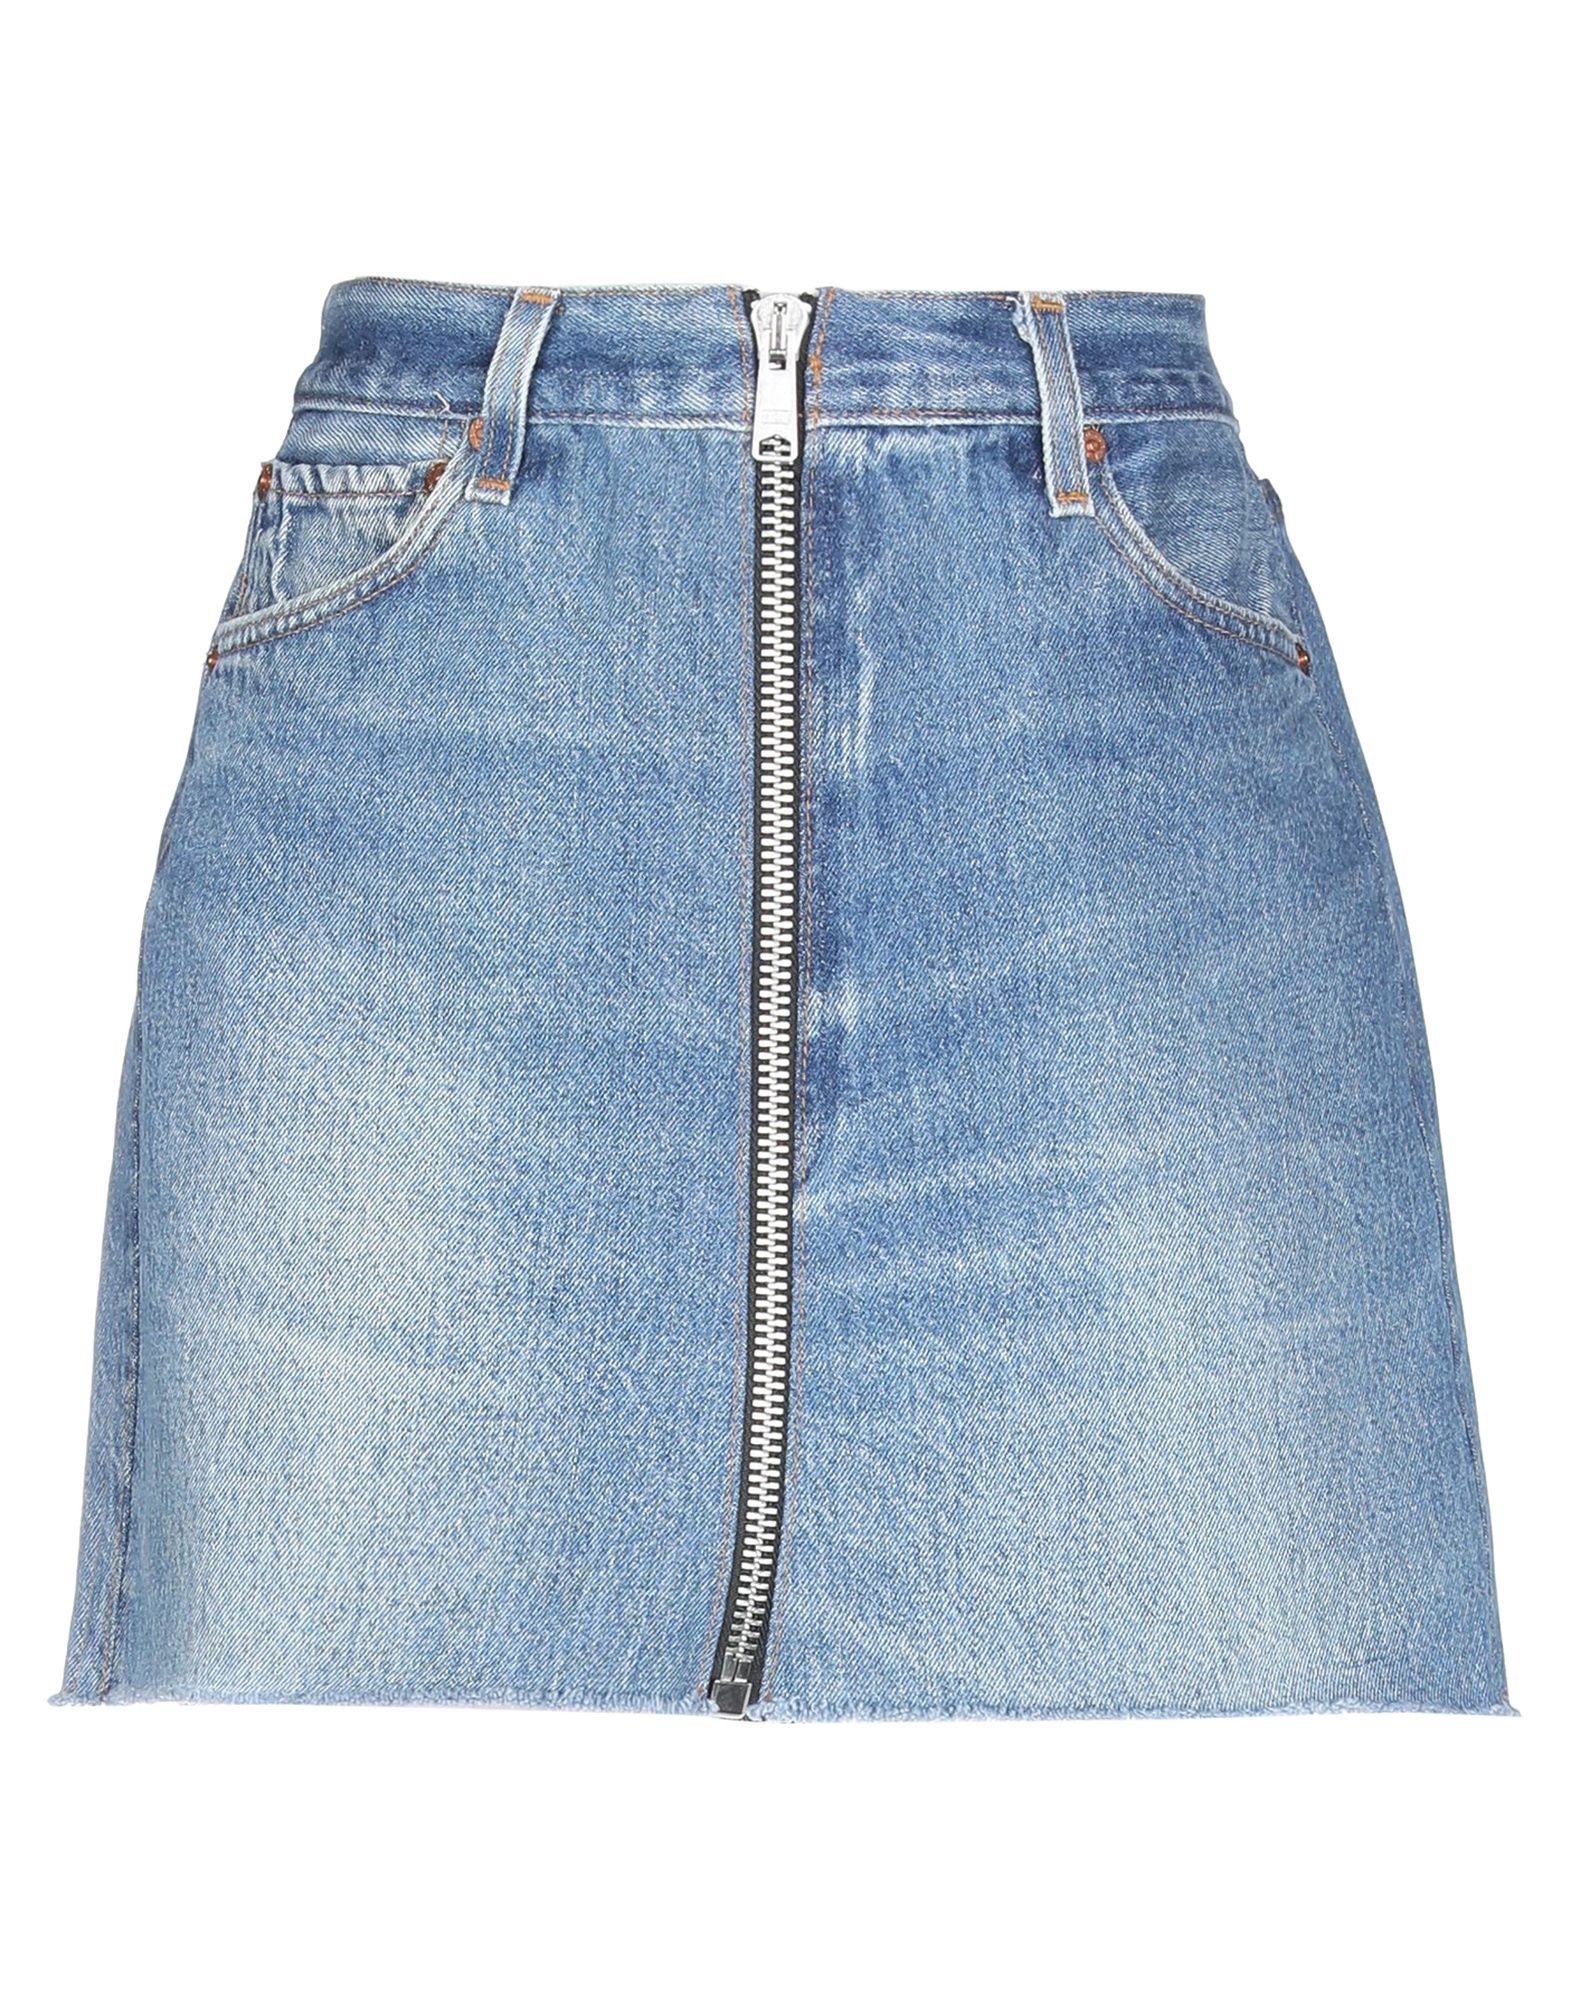 RE/DONE BY LEVI'S DENIM SKIRTS,42738751LR 2